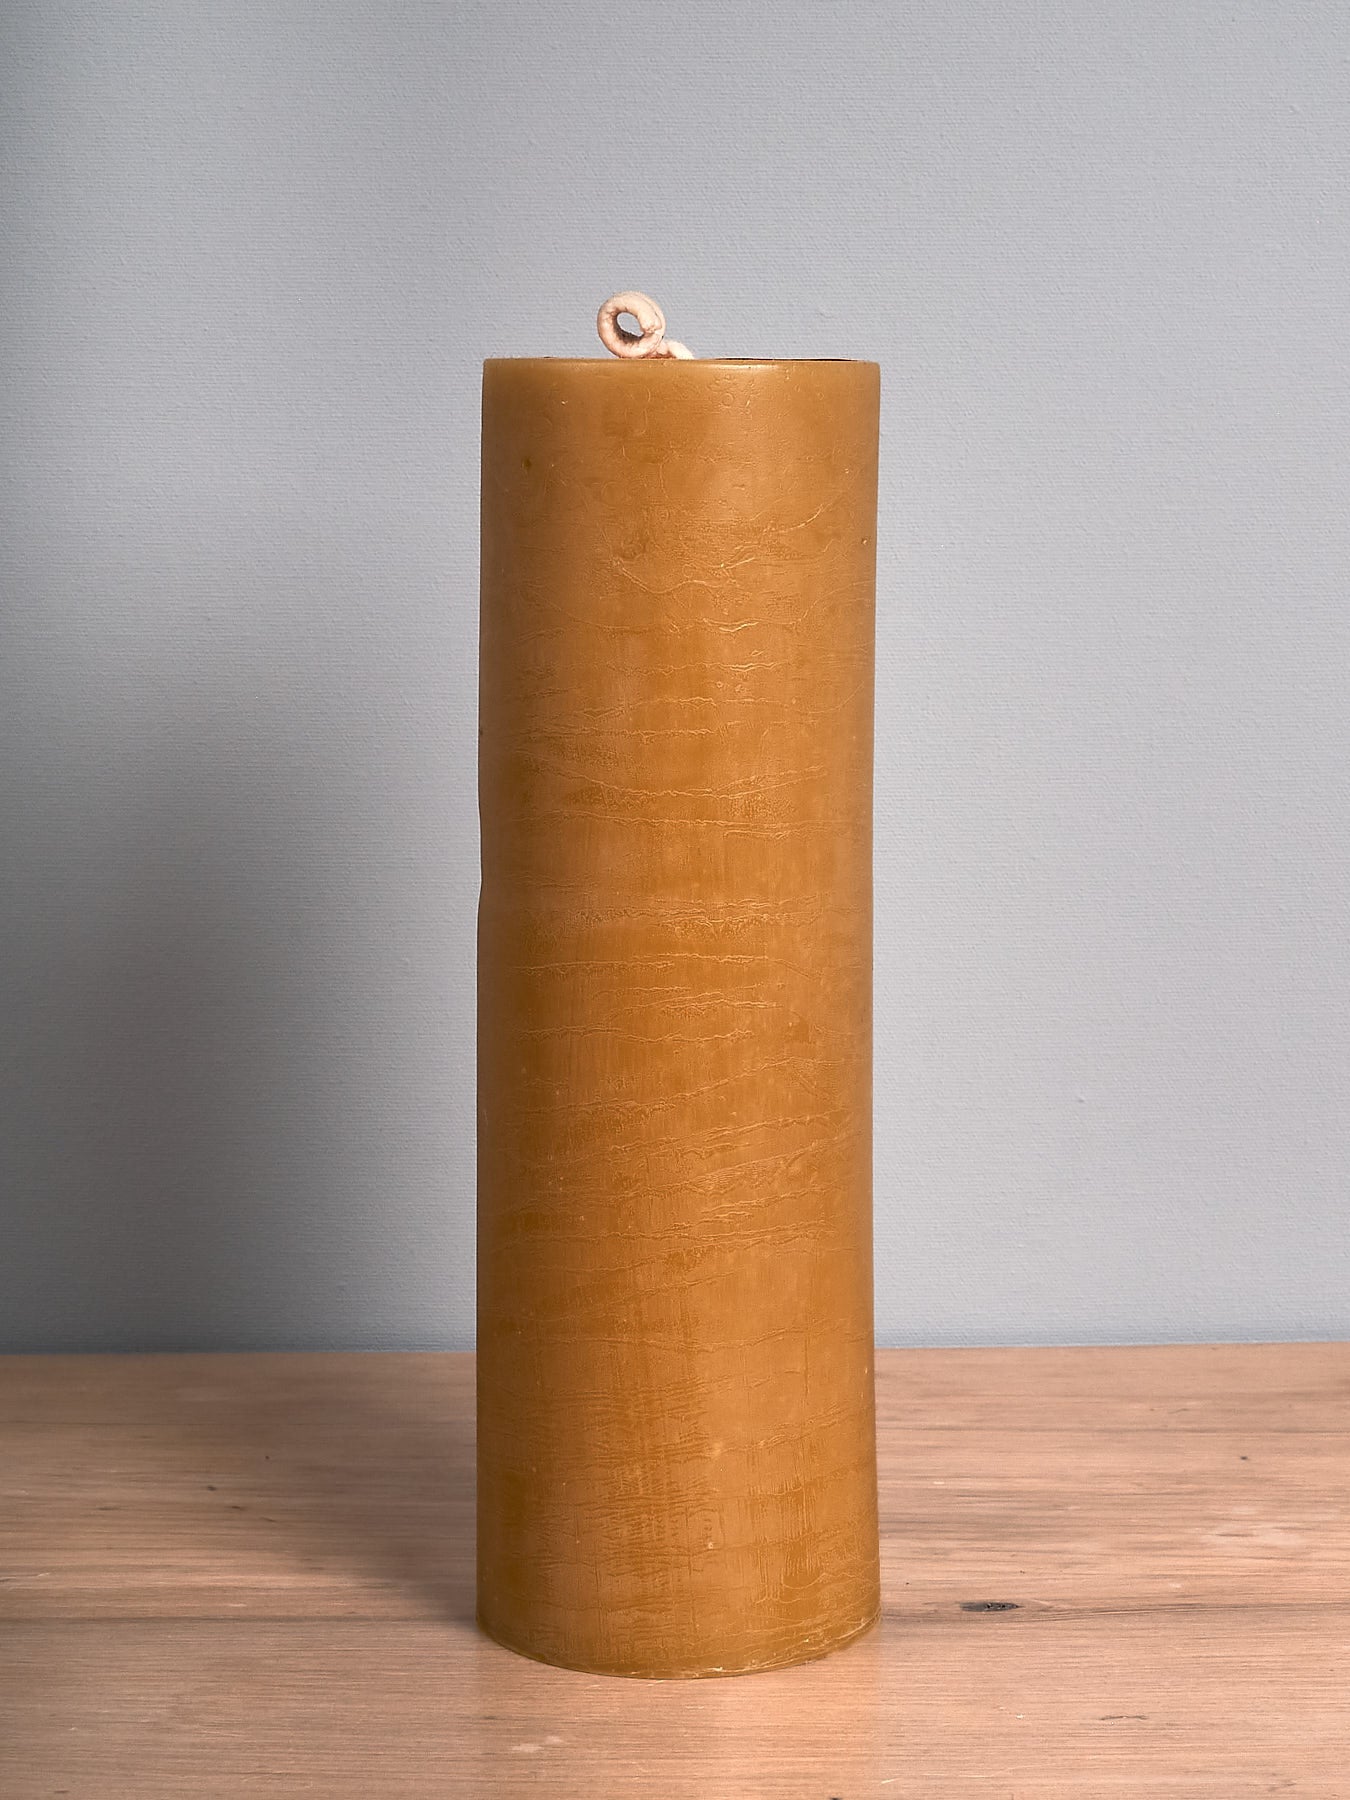 An Cafe Candle - Extra Large sitting on a wooden table. (Brand: Hohepa Candles)